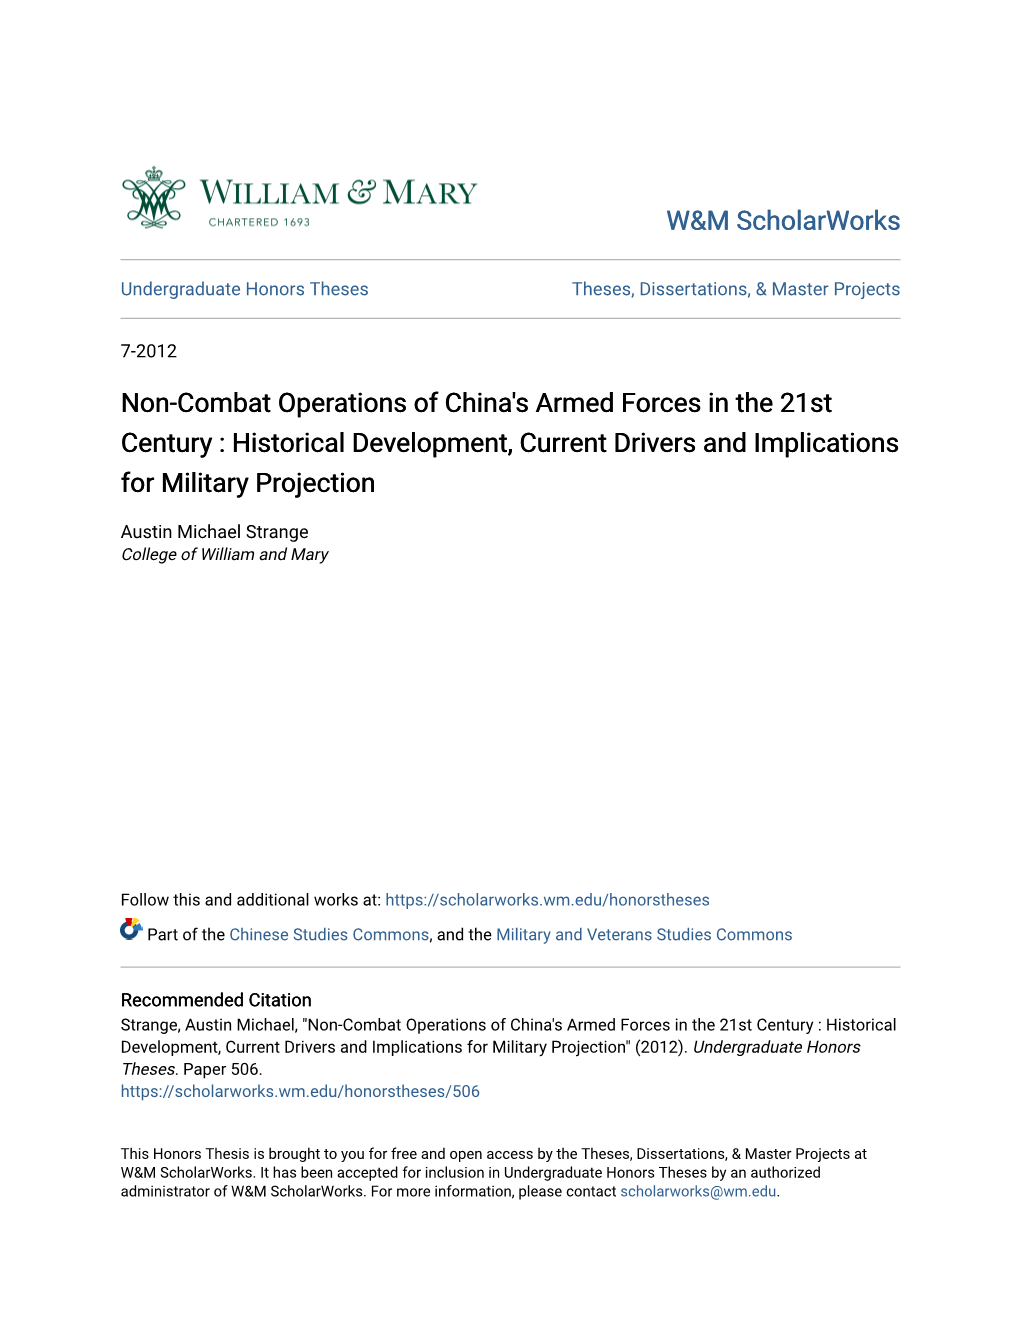 Non-Combat Operations of China's Armed Forces in the 21St Century : Historical Development, Current Drivers and Implications for Military Projection